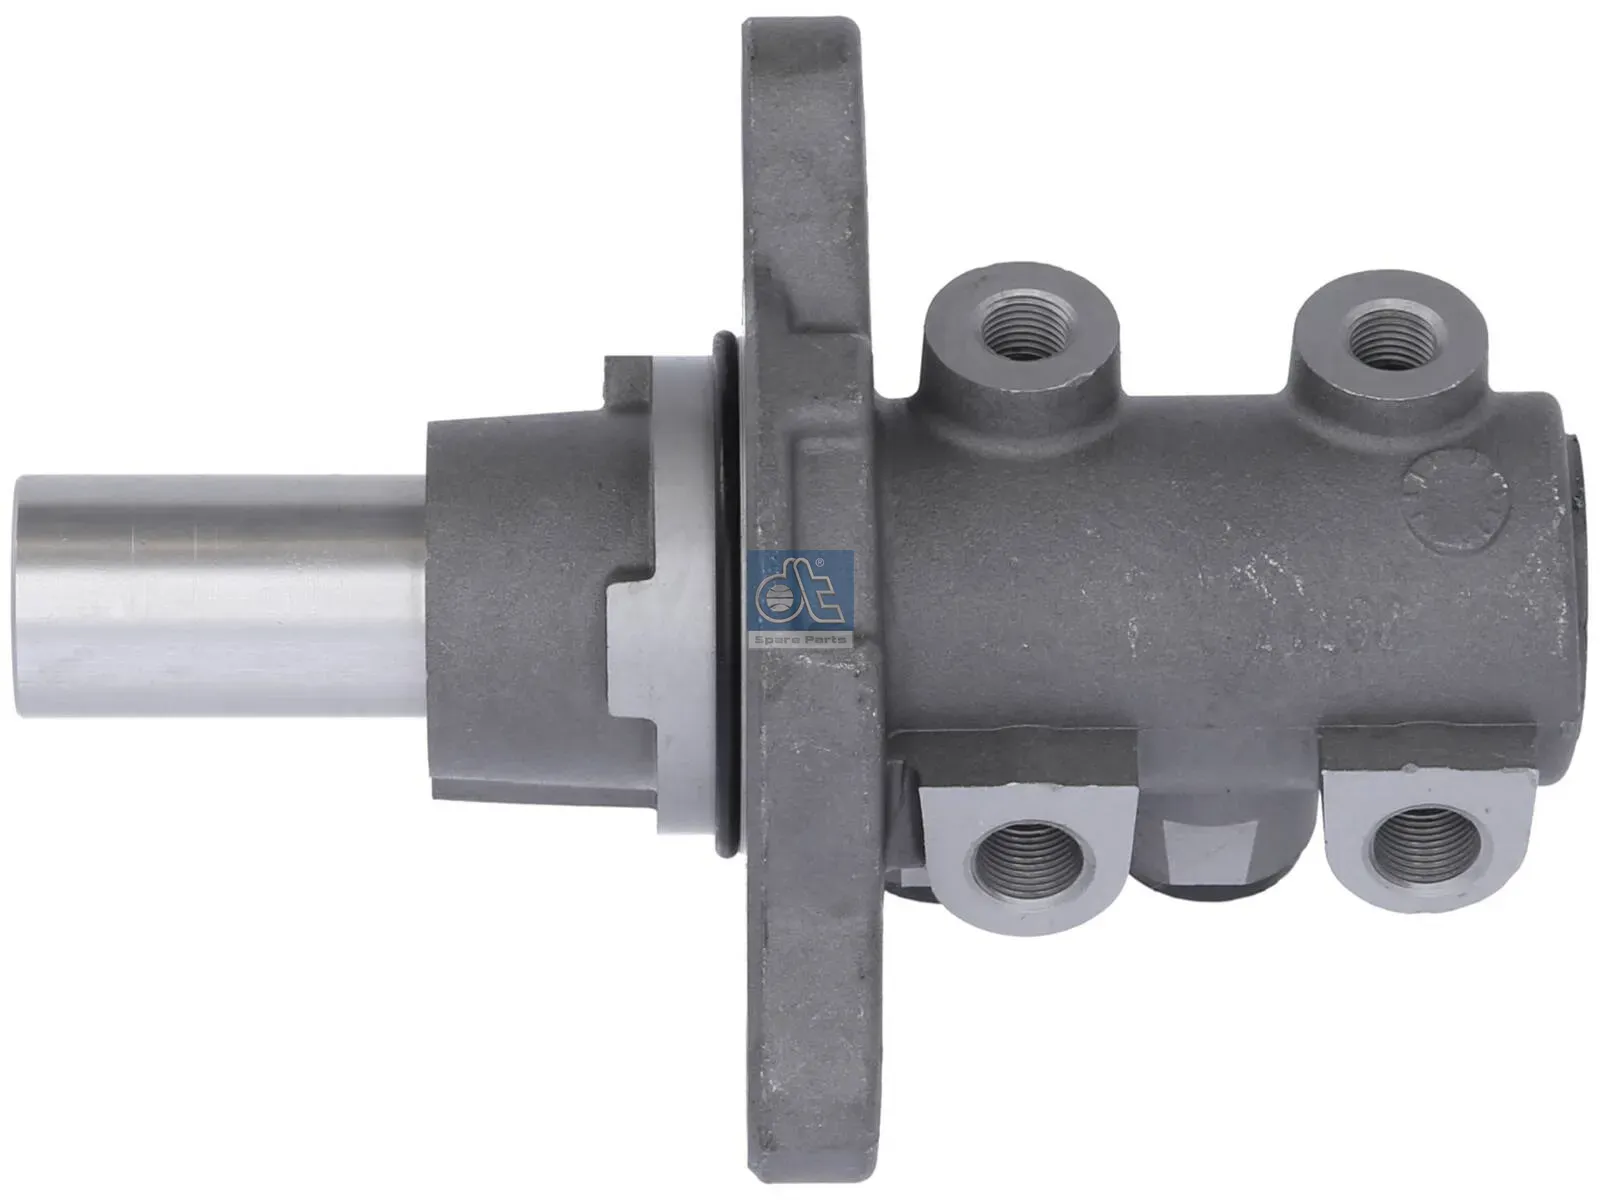 Brake master cylinder, without container